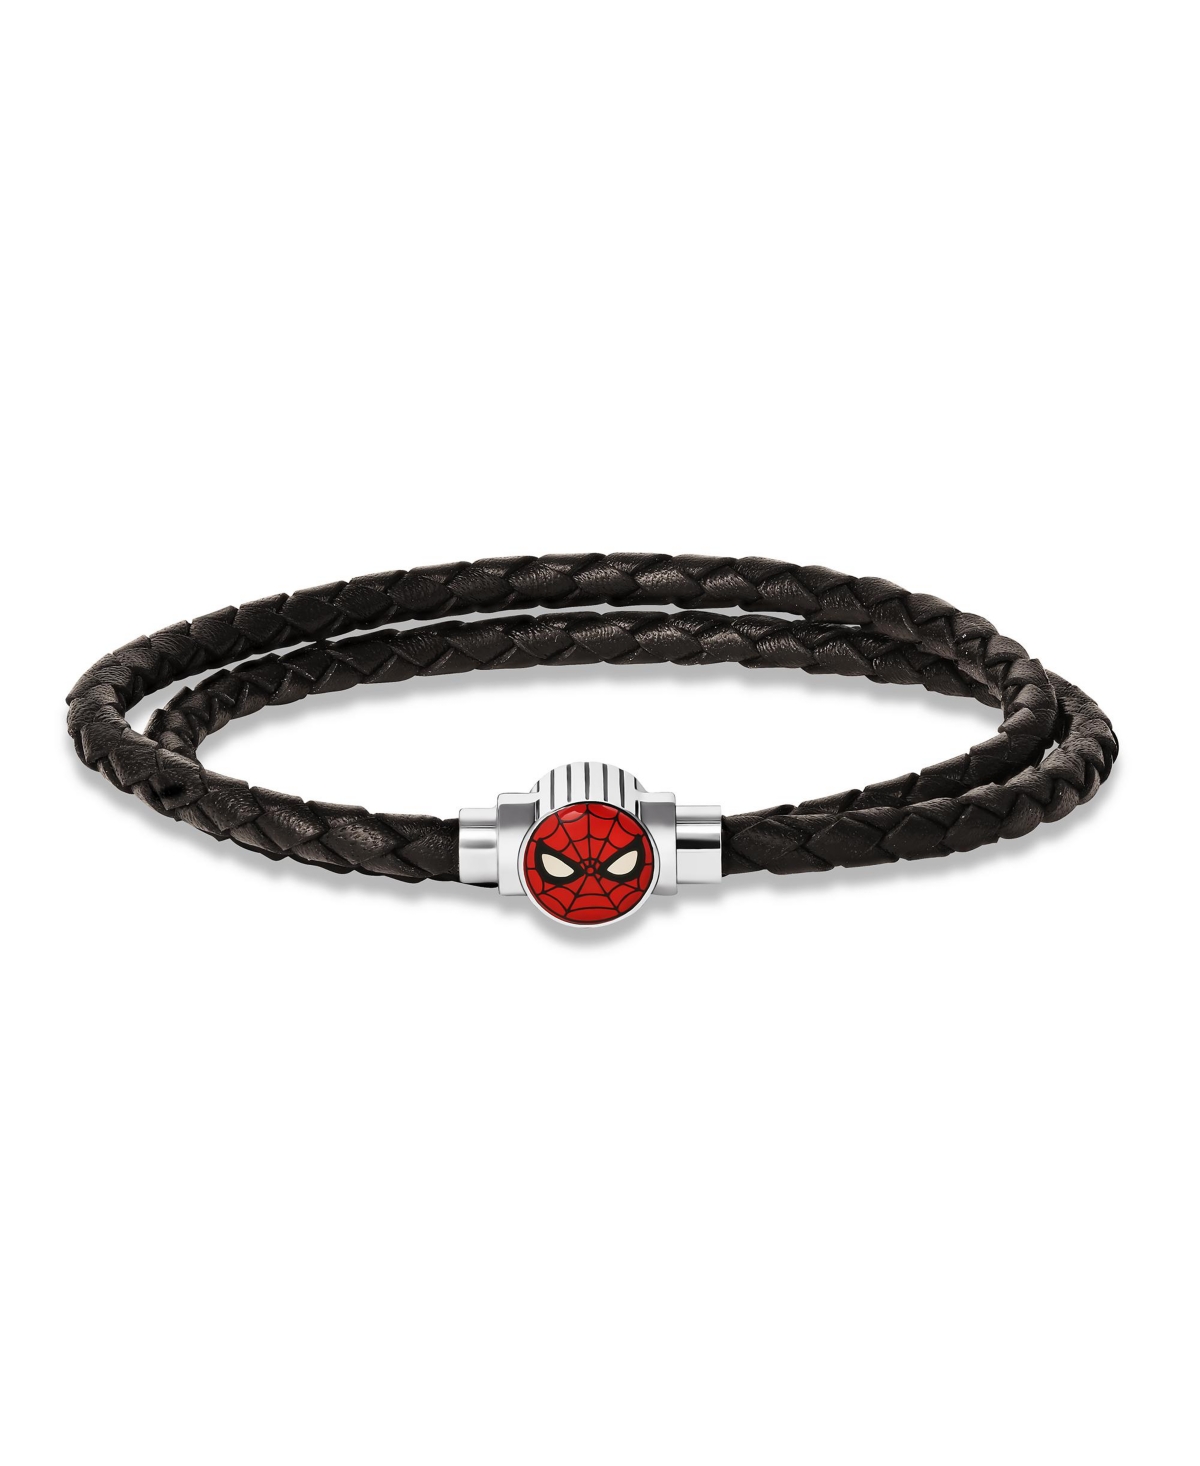 Spider-Man Mens Double-Wrap Woven Stainless Steel Pendant Bracelet - Black and red